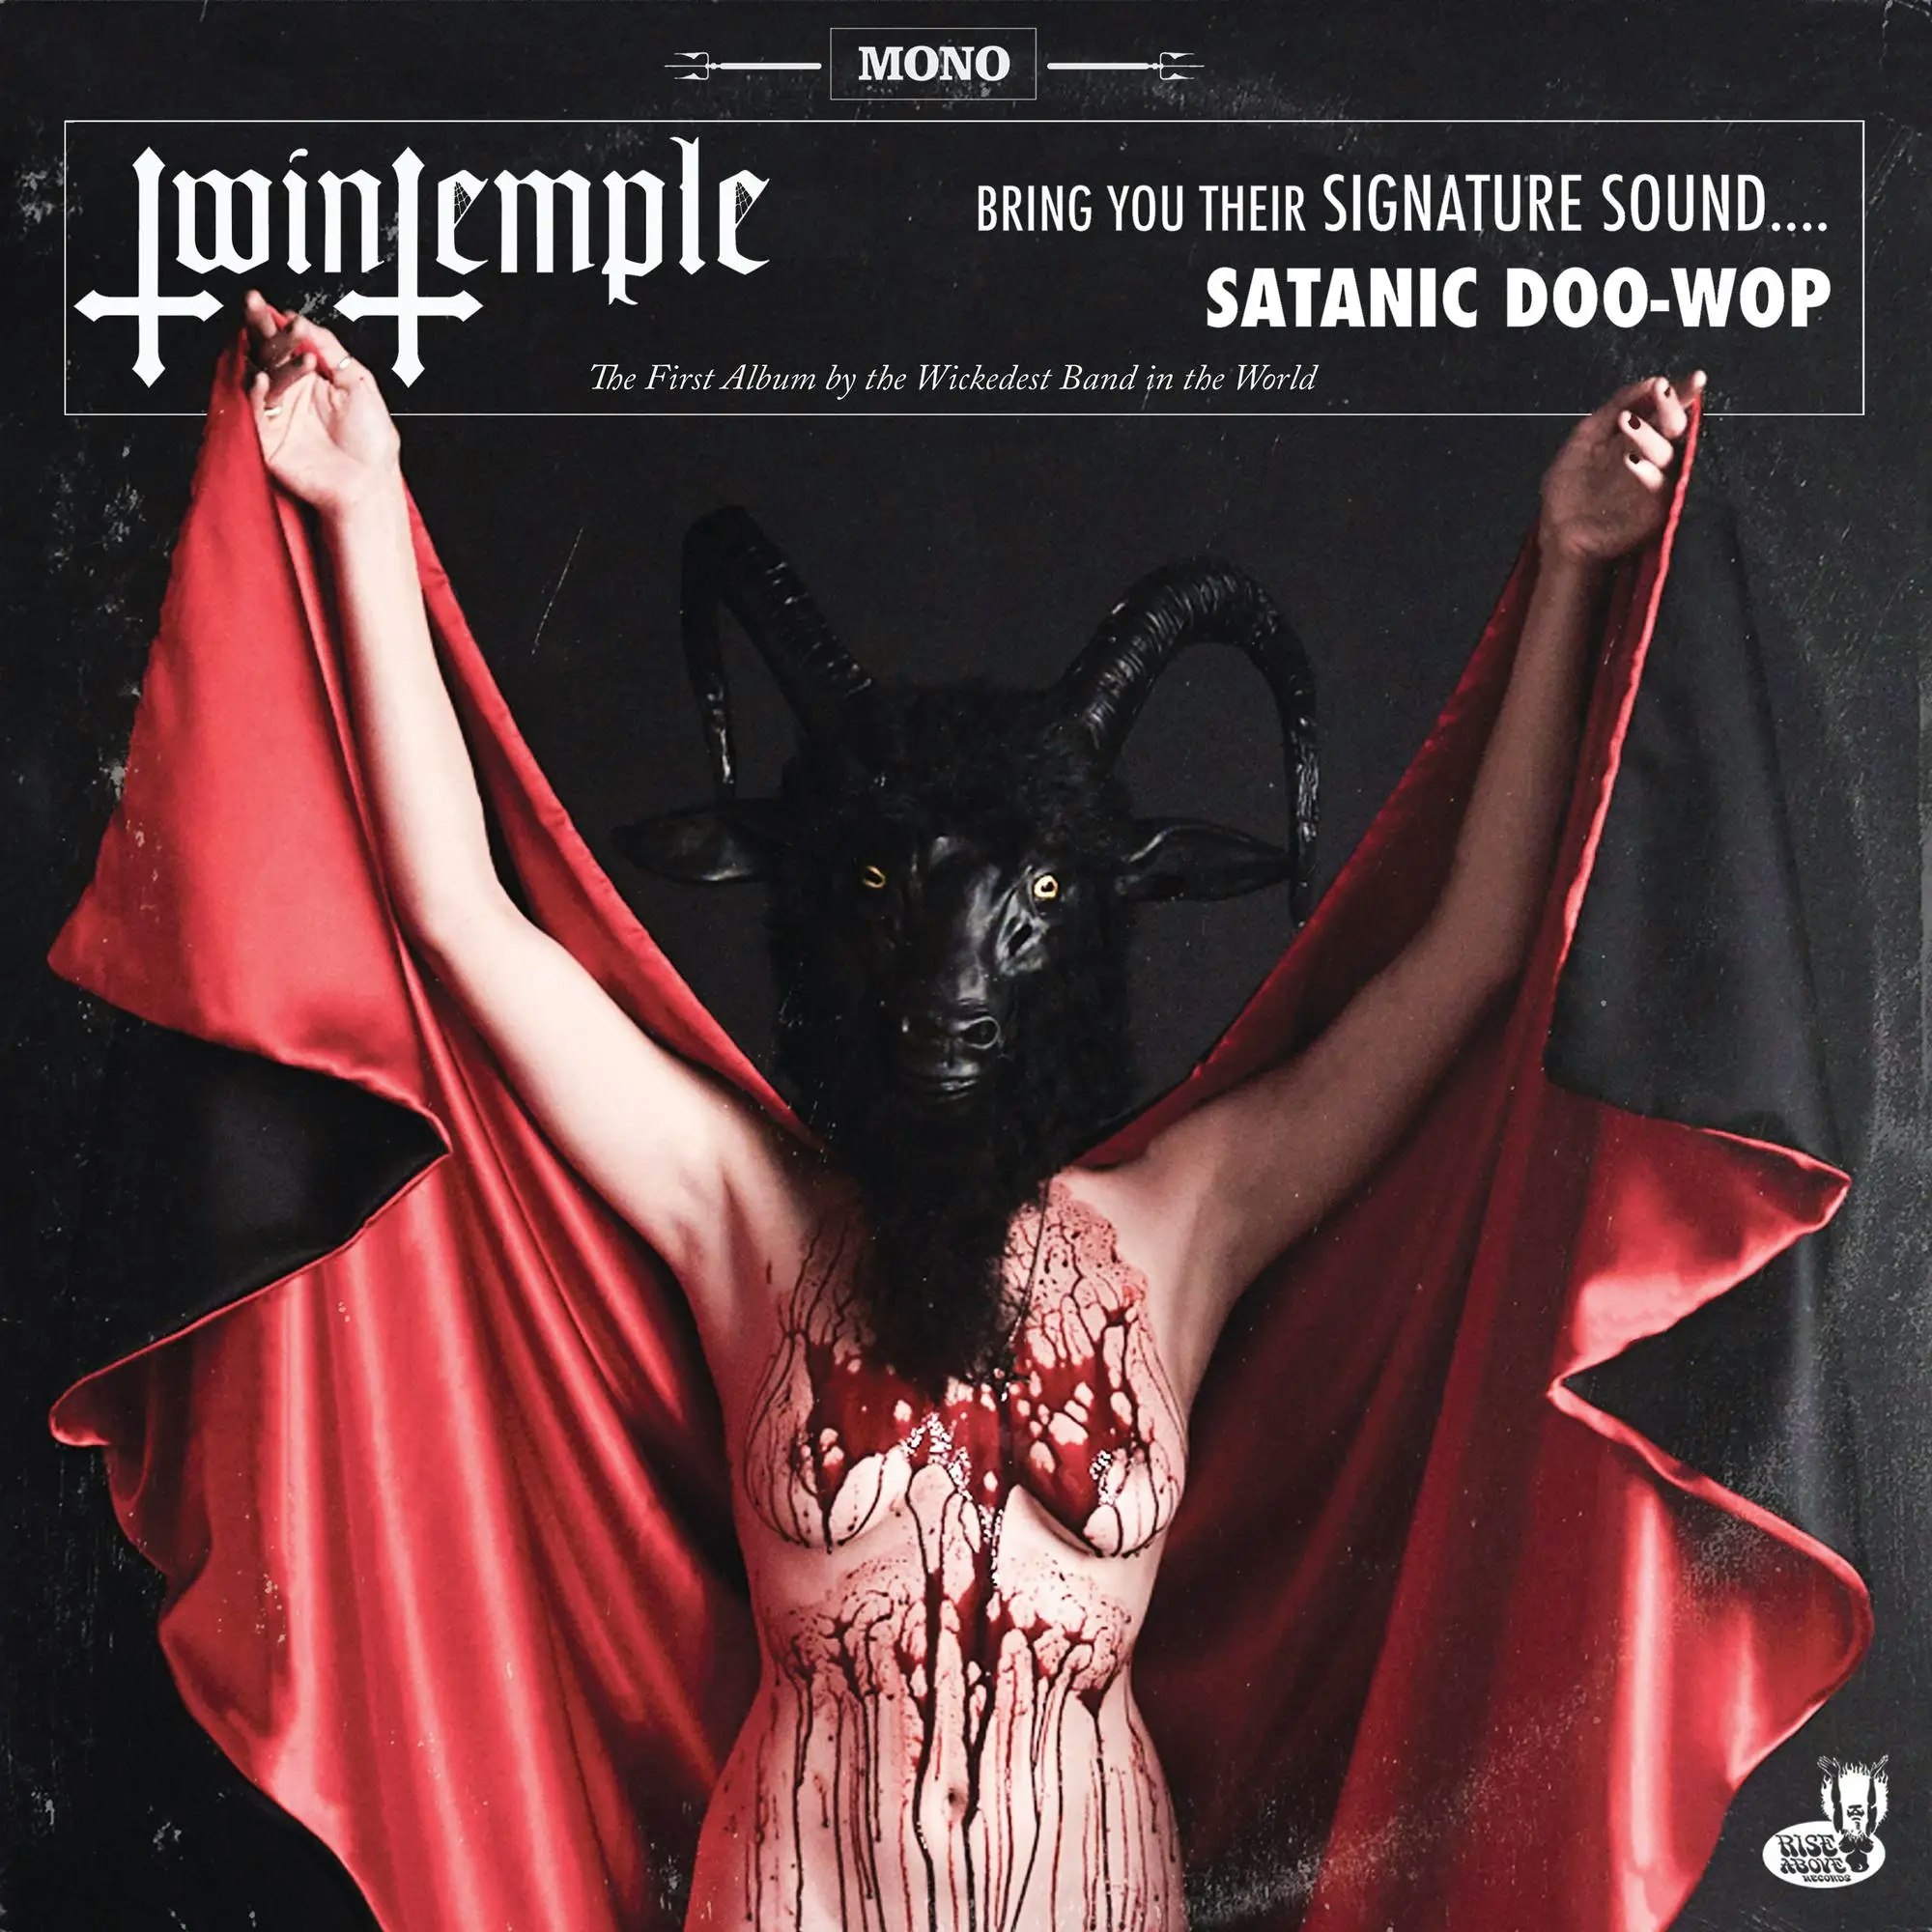 Album artwork for Twin Temple (Bring You Their Signature Sound.... Satanic Doo-Wop) by Twin Temple